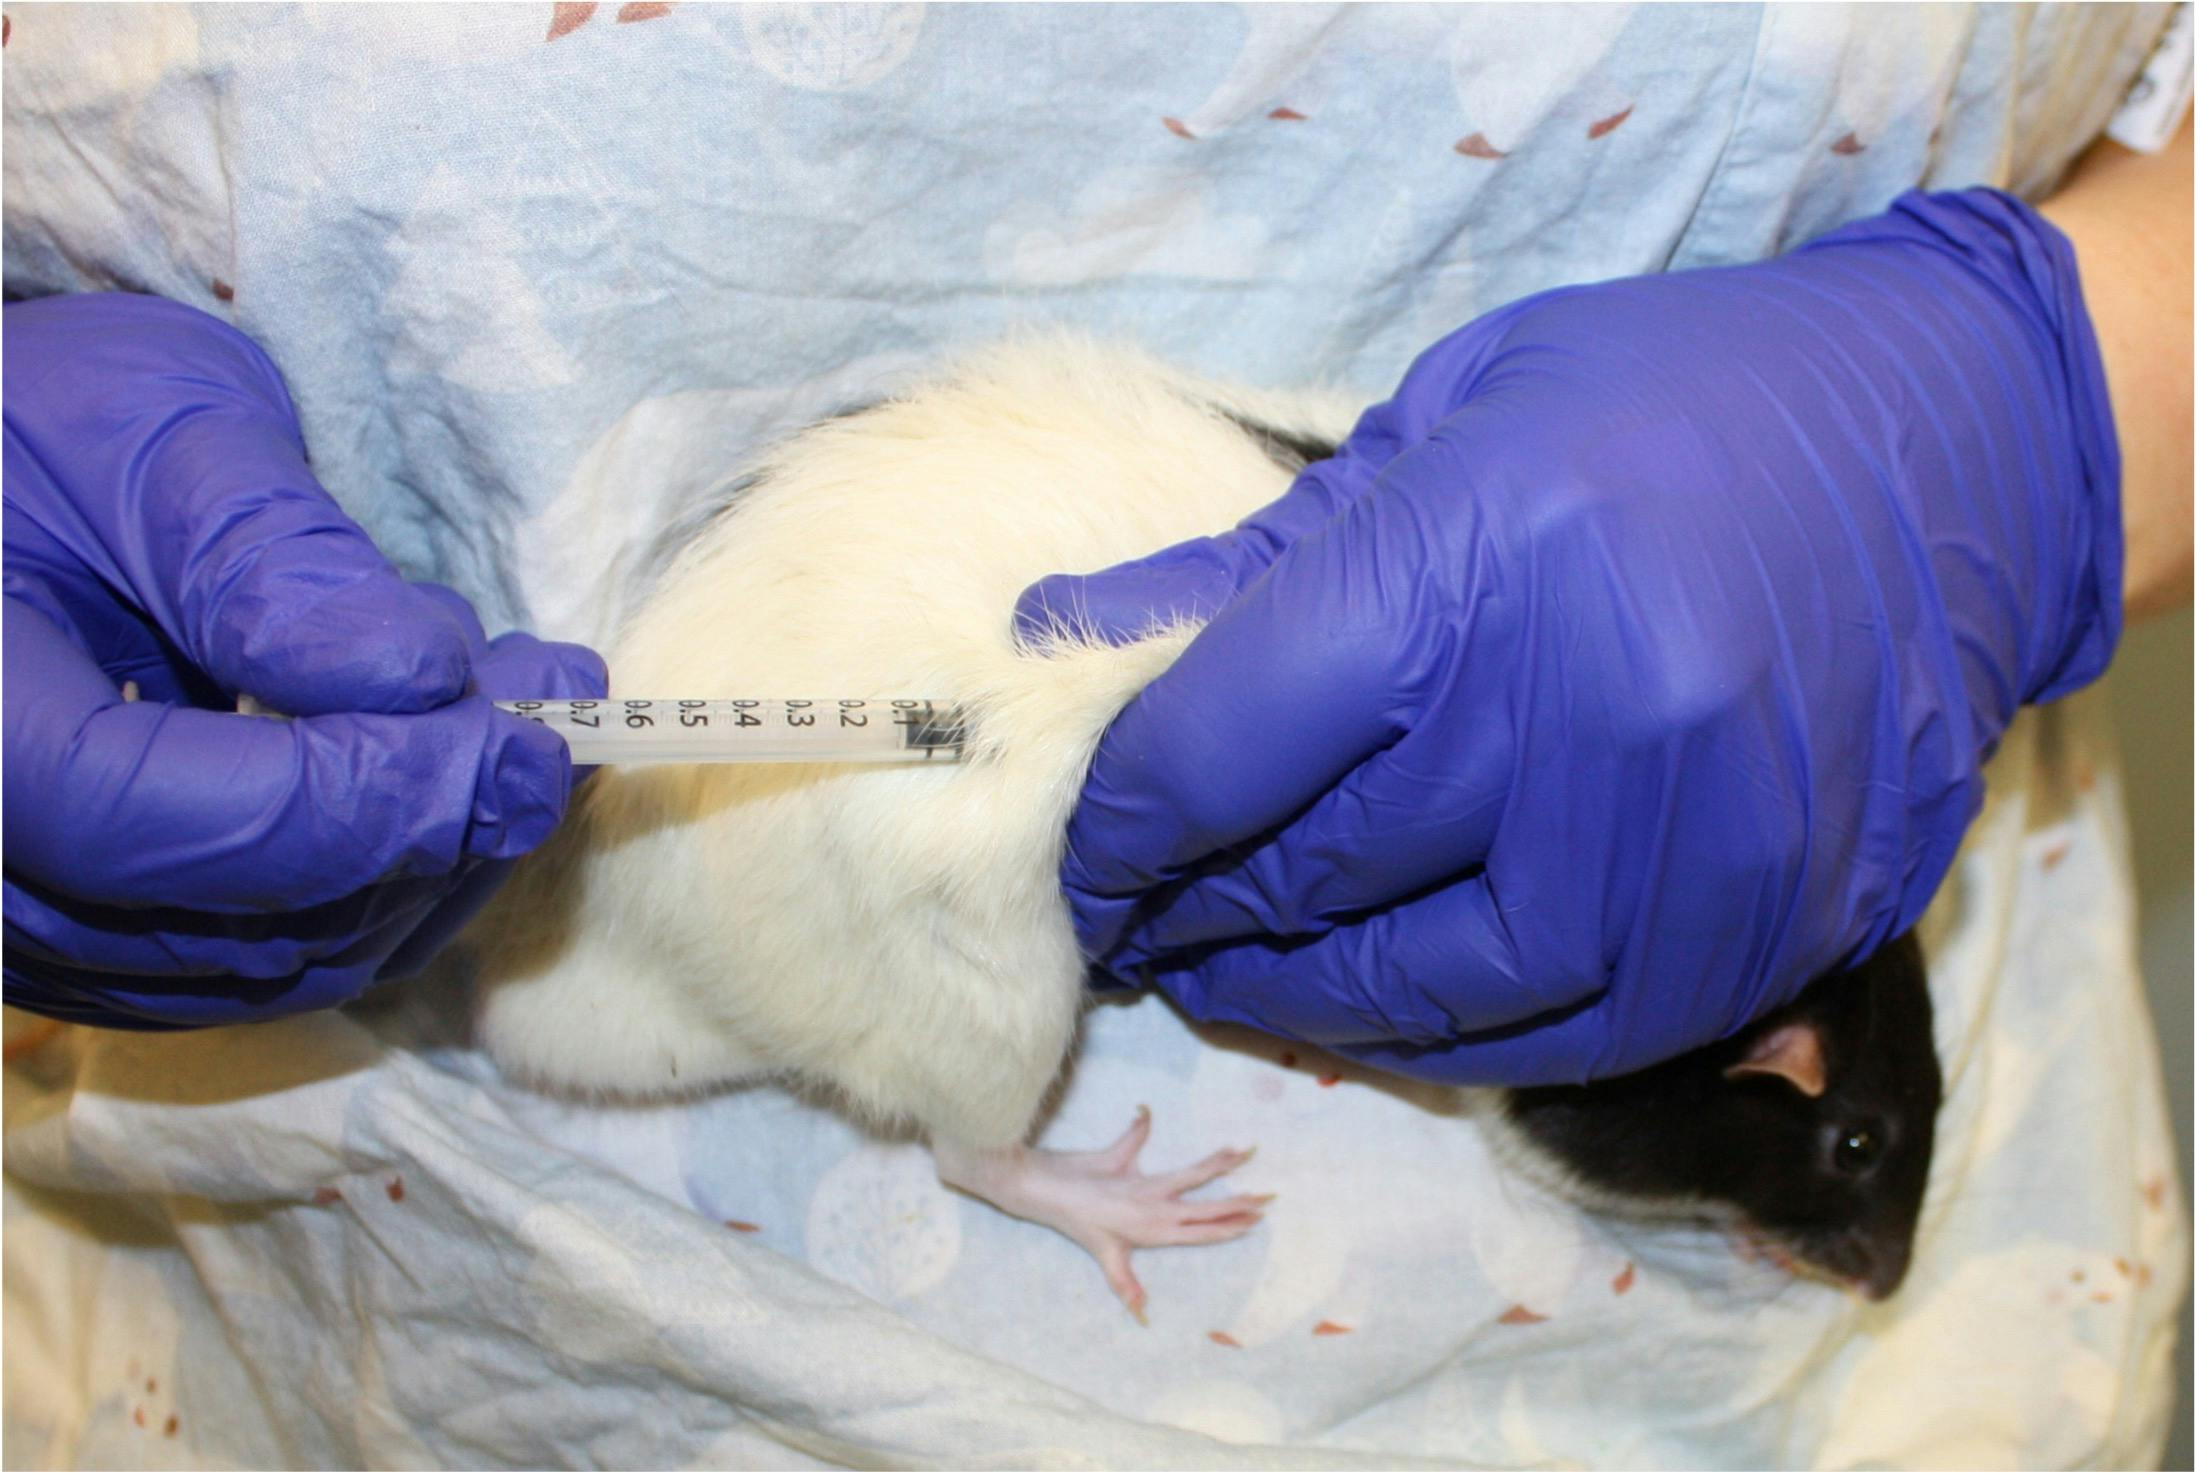 A rat being dosed while held against a scientist's abdomen.